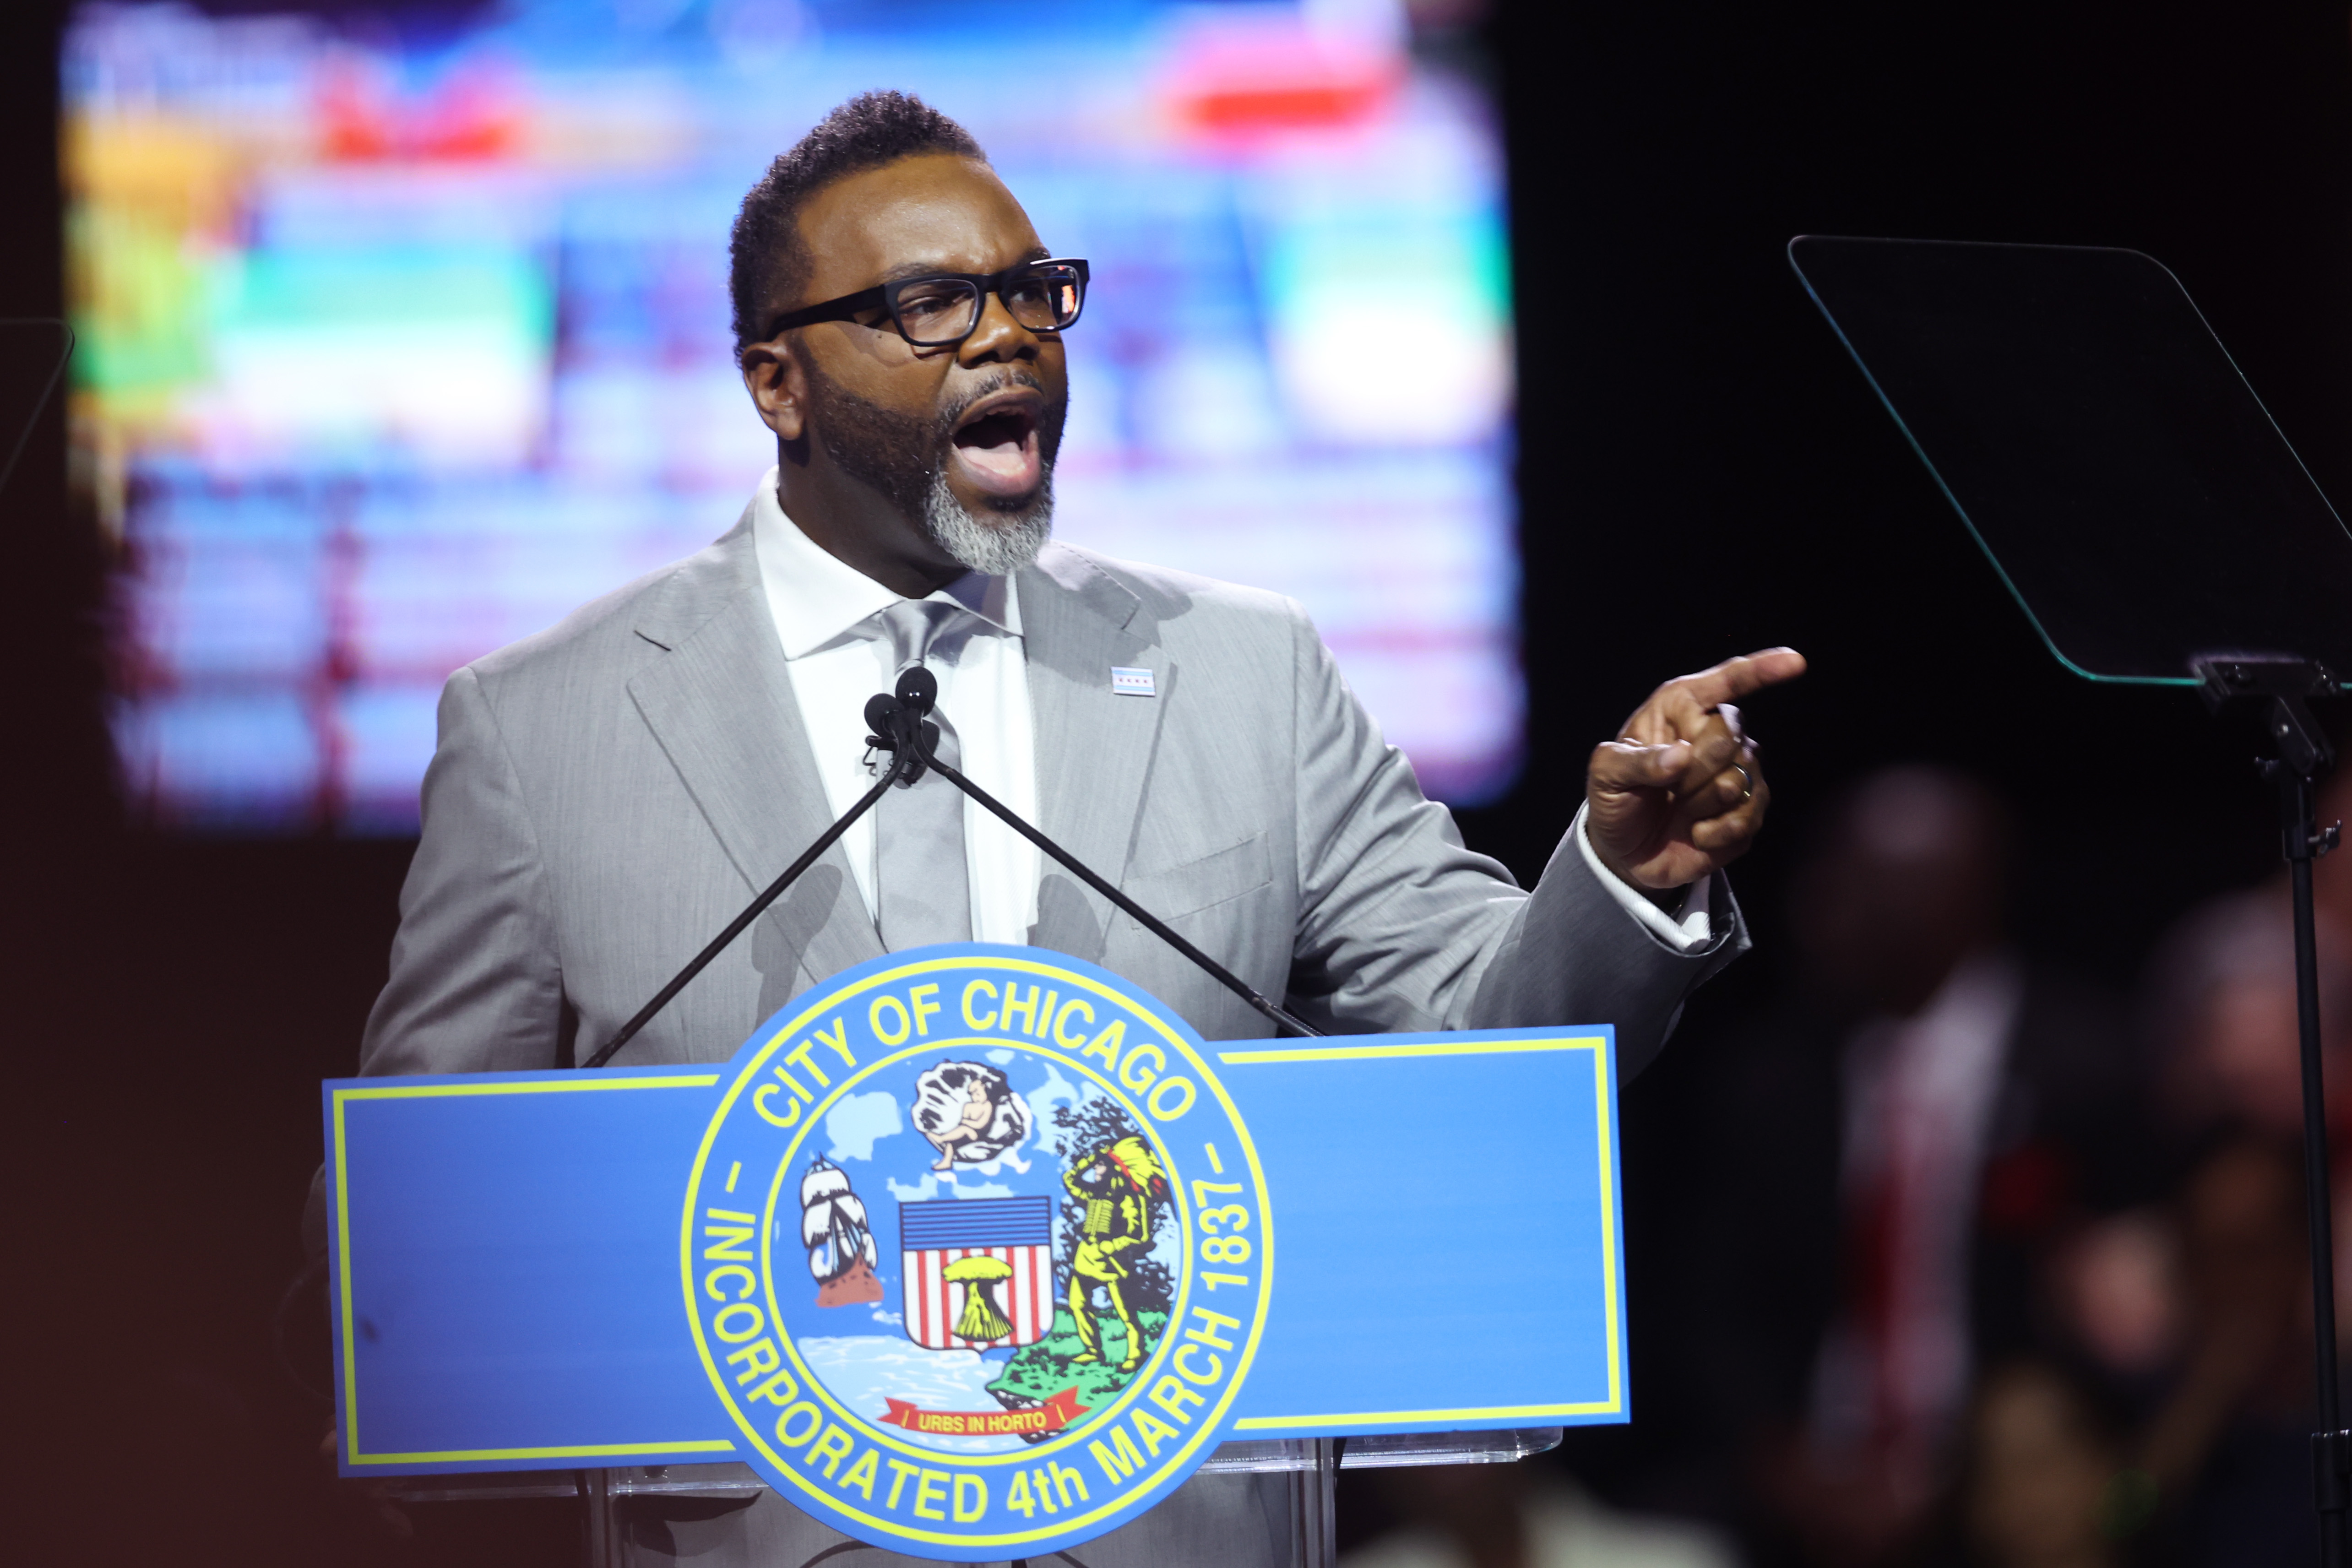 Mayor Brandon Johnson, seen here at his augural address earlier this month, campaigned on combating homelessness and bringing more affordable housing to Chicago. (Credit: Getty file photo)